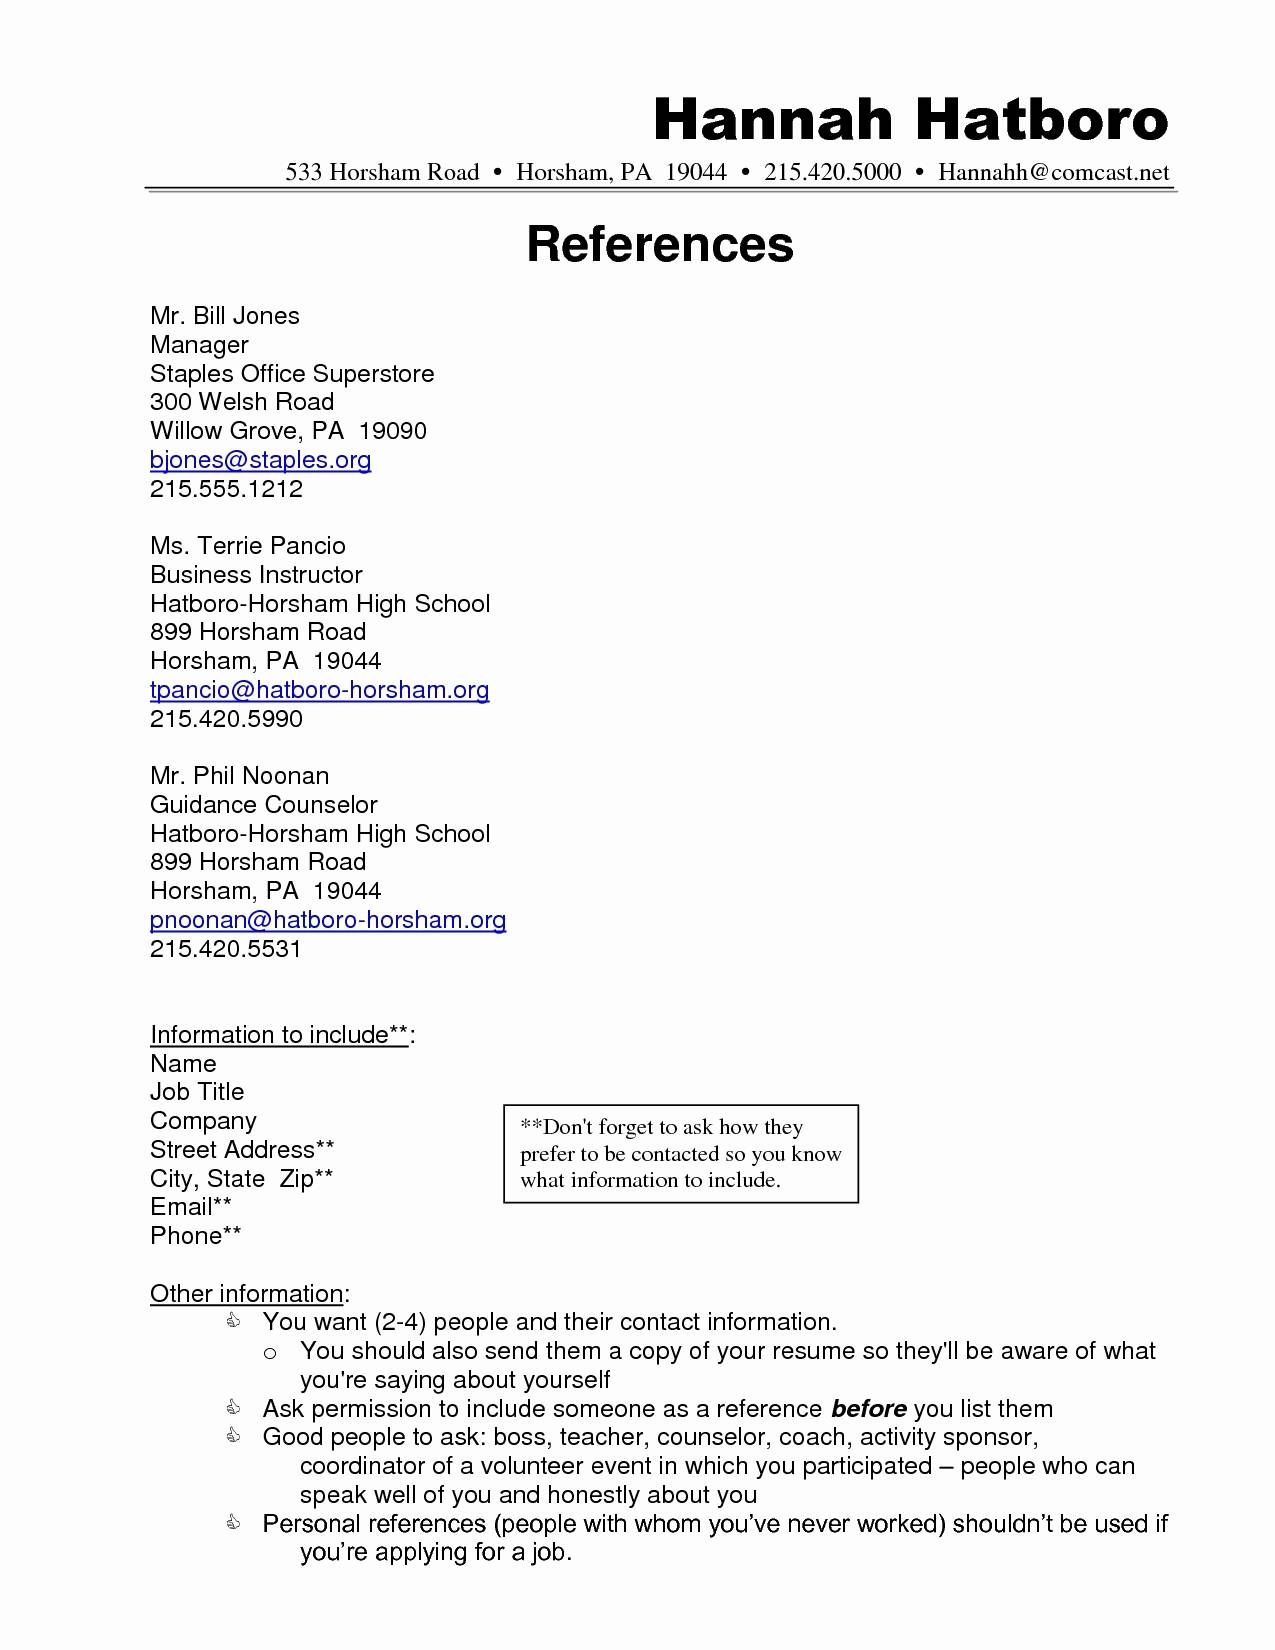 resume references examples for students